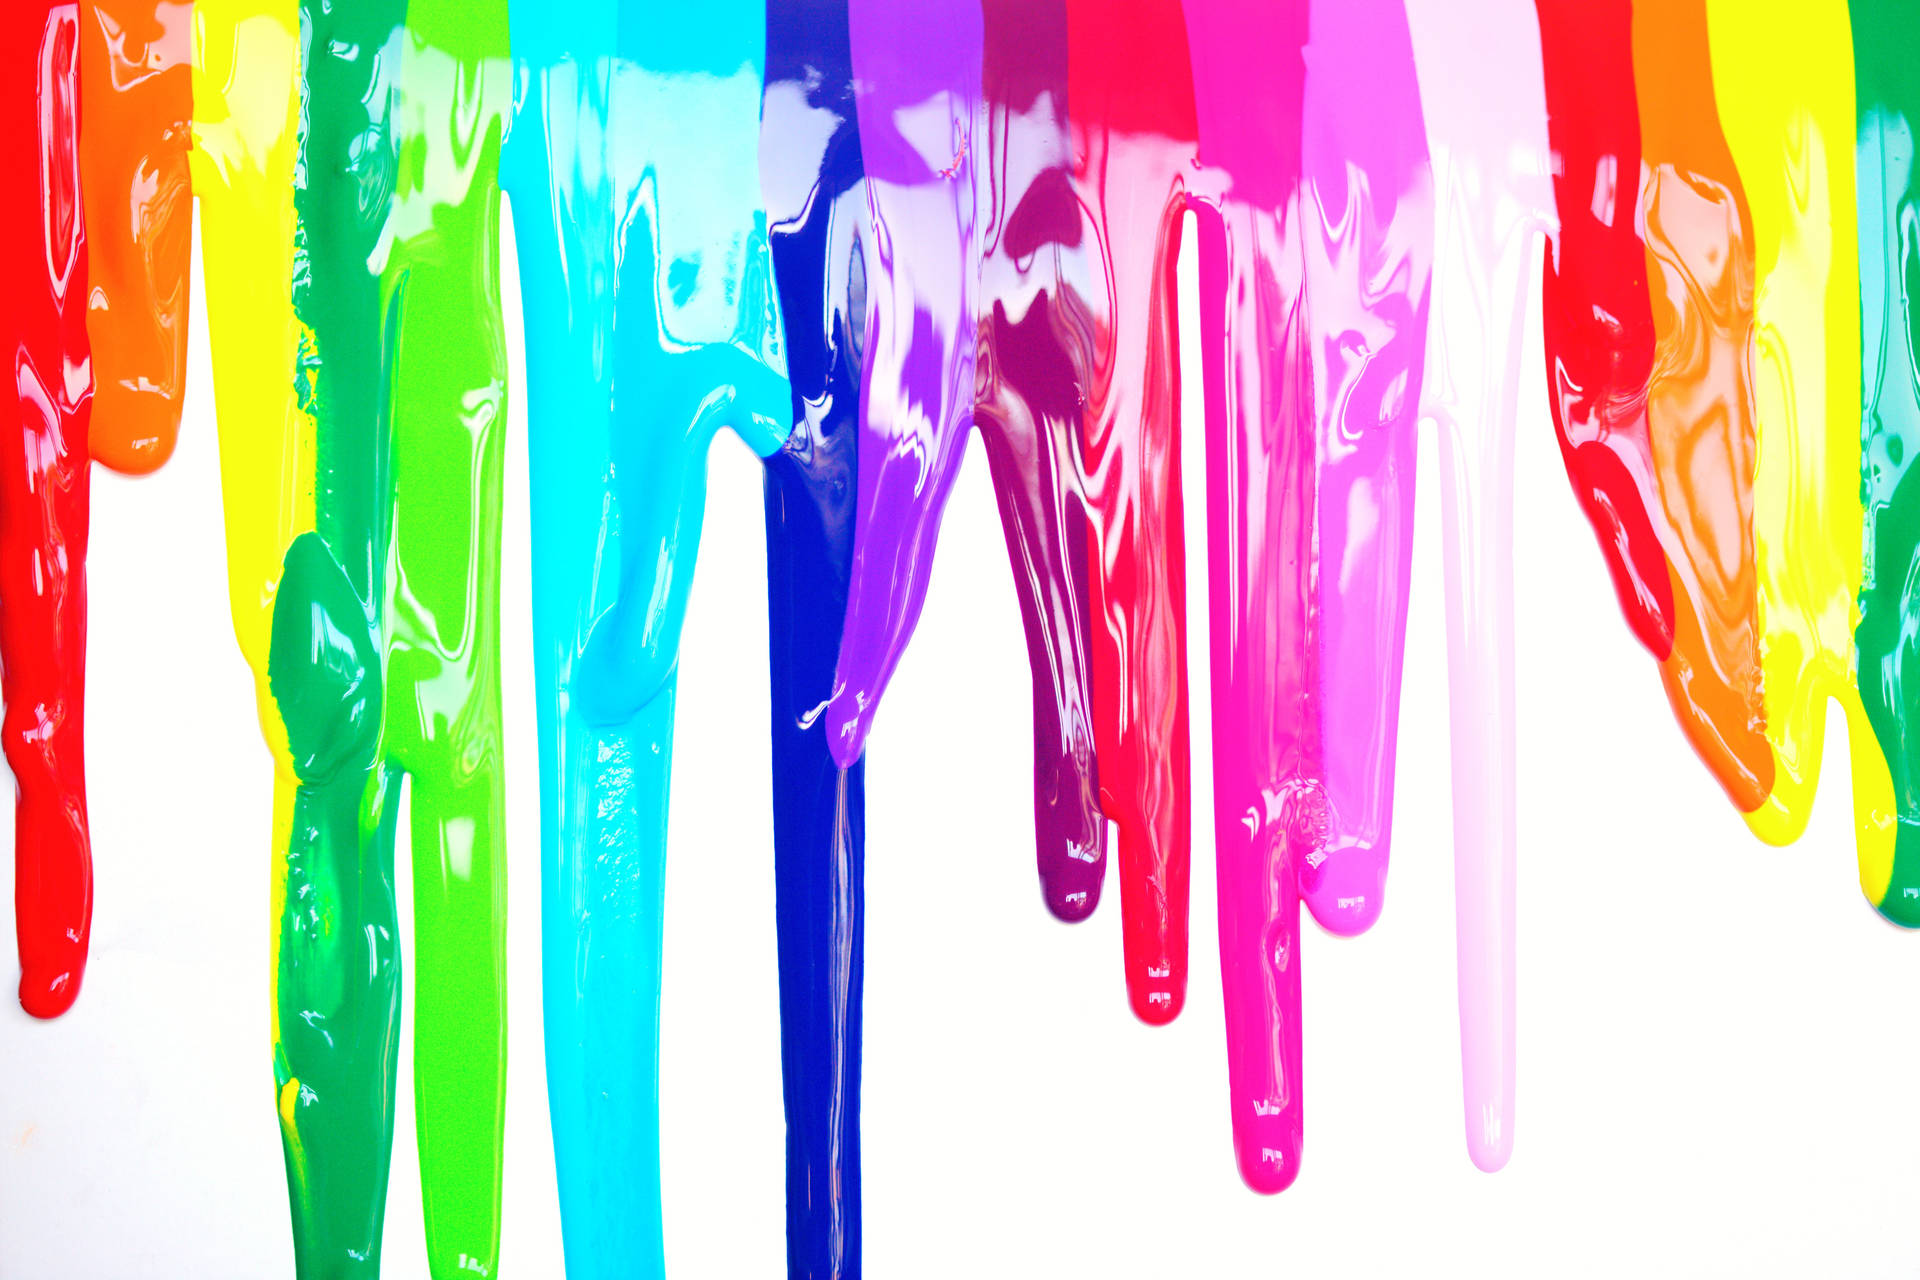 Colorful 5616X3744 Wallpaper and Background Image